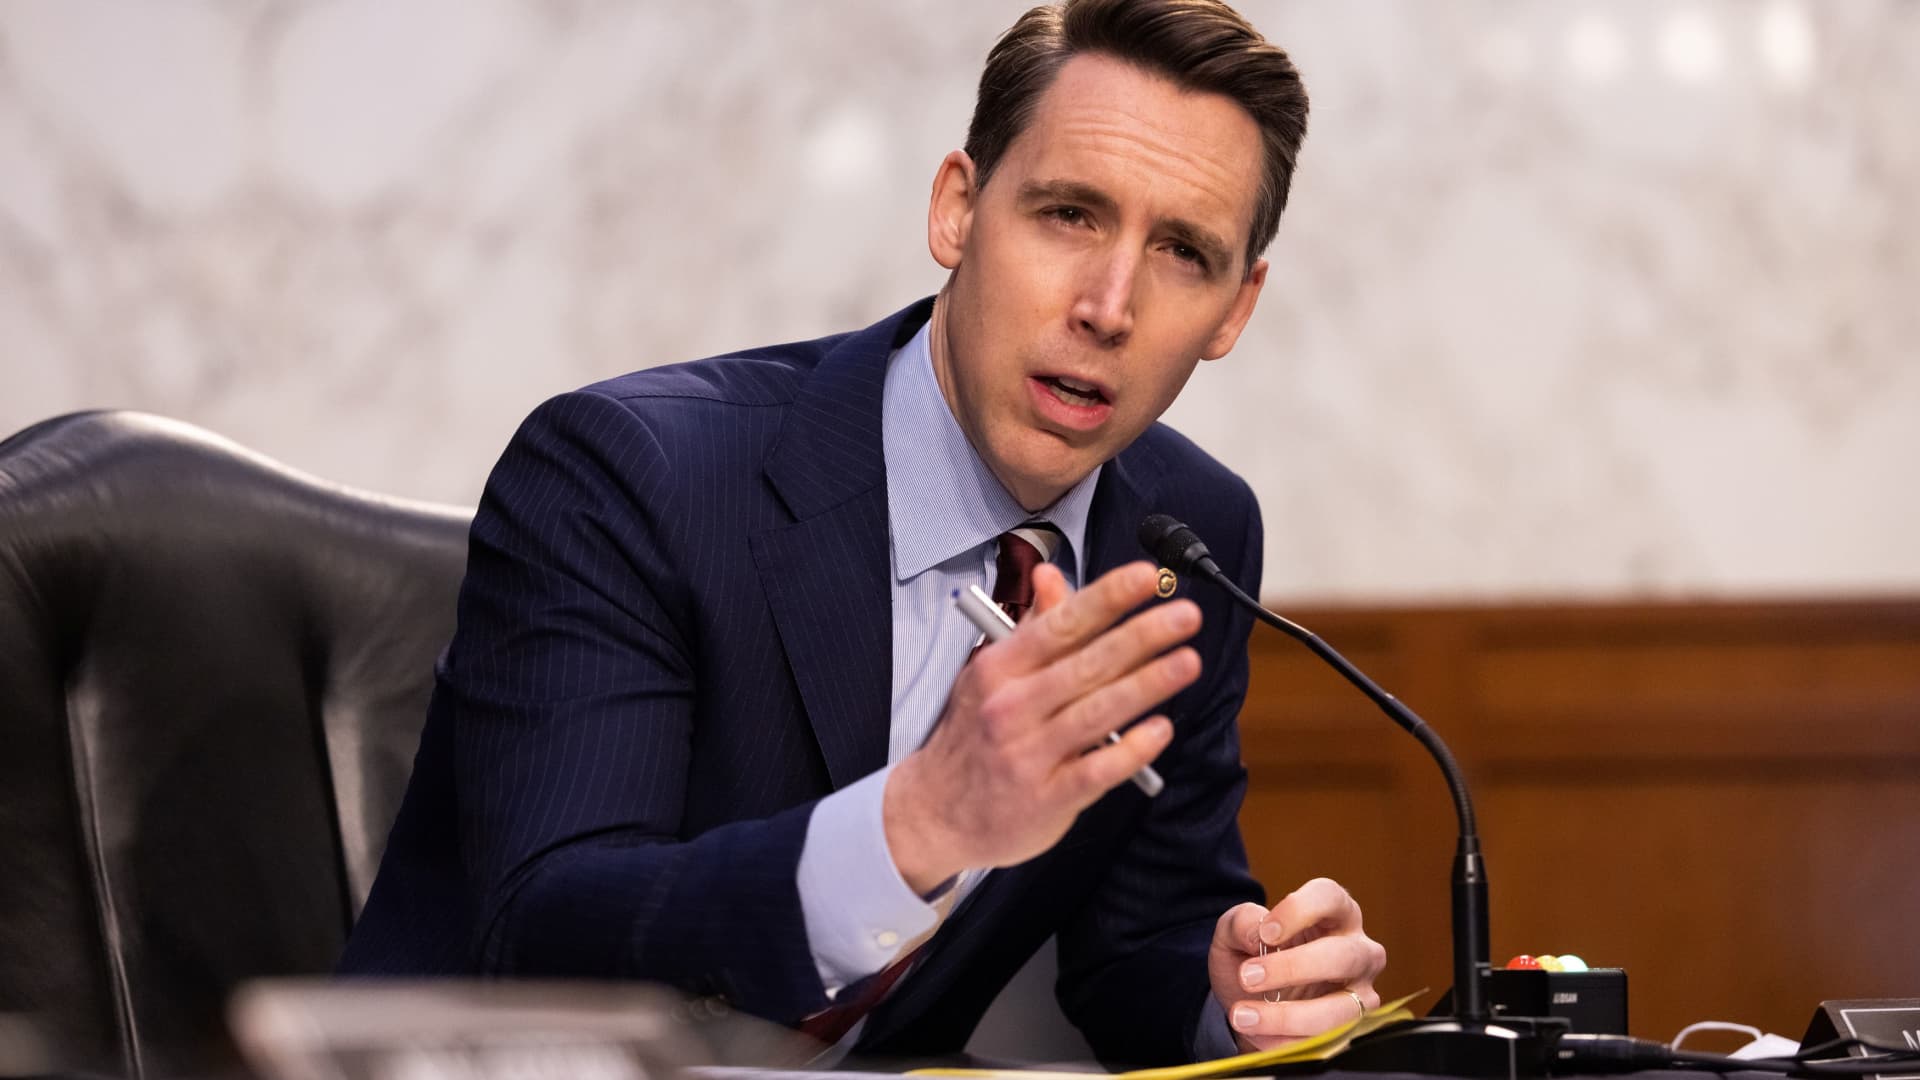 Senator Josh Hawley, R-MO, speaks during a Senate Judiciary Committee hearing on the the January 6th insurrection, in the Hart Senate Office Building on Capitol Hill in Washington, DC, March 2, 2021.